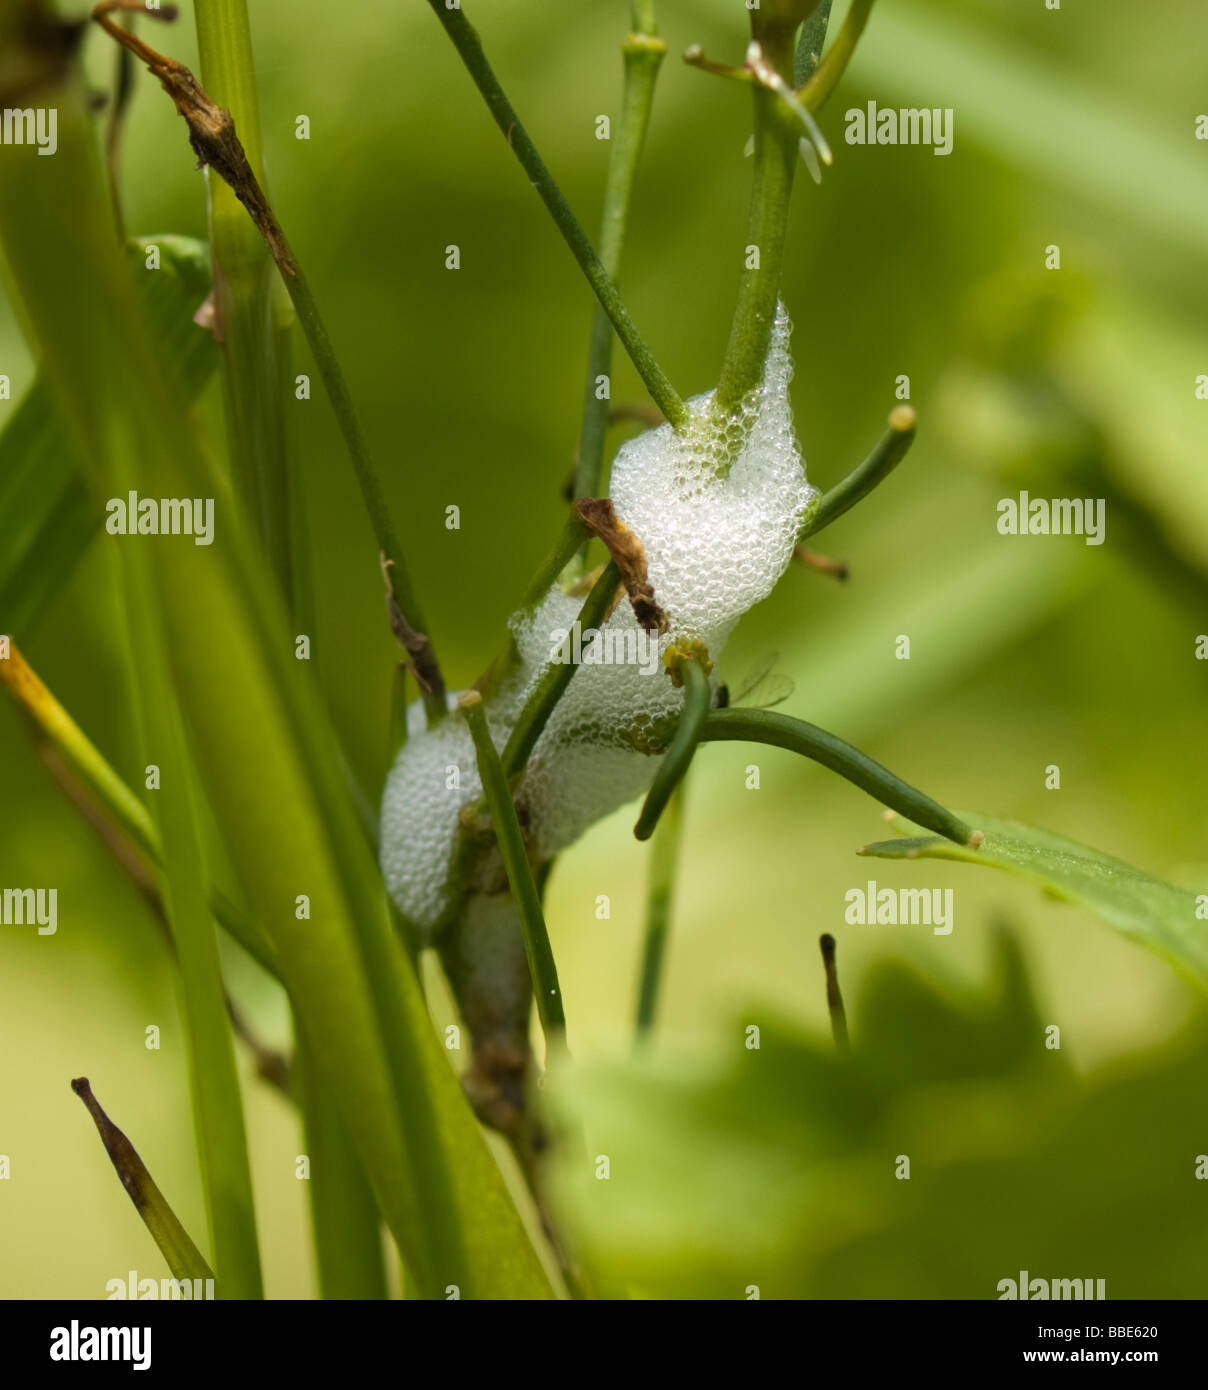 Common Froghopper (Philoenus spumarius) nymph in cuckoo spit froth, France Stock Photo